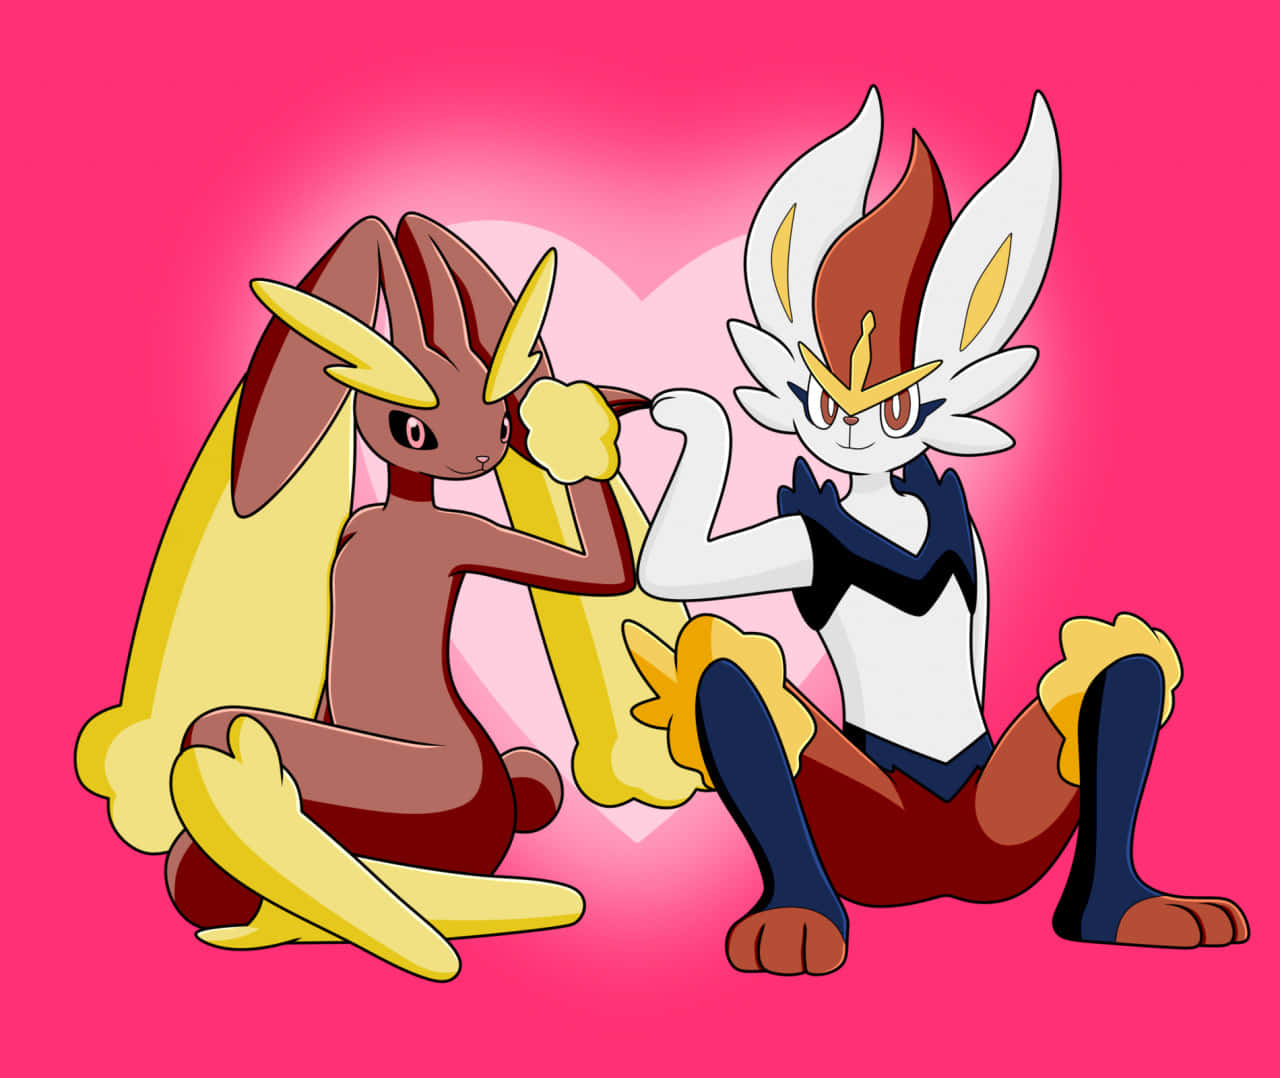 two pokemon characters sitting on a pink background Wallpaper